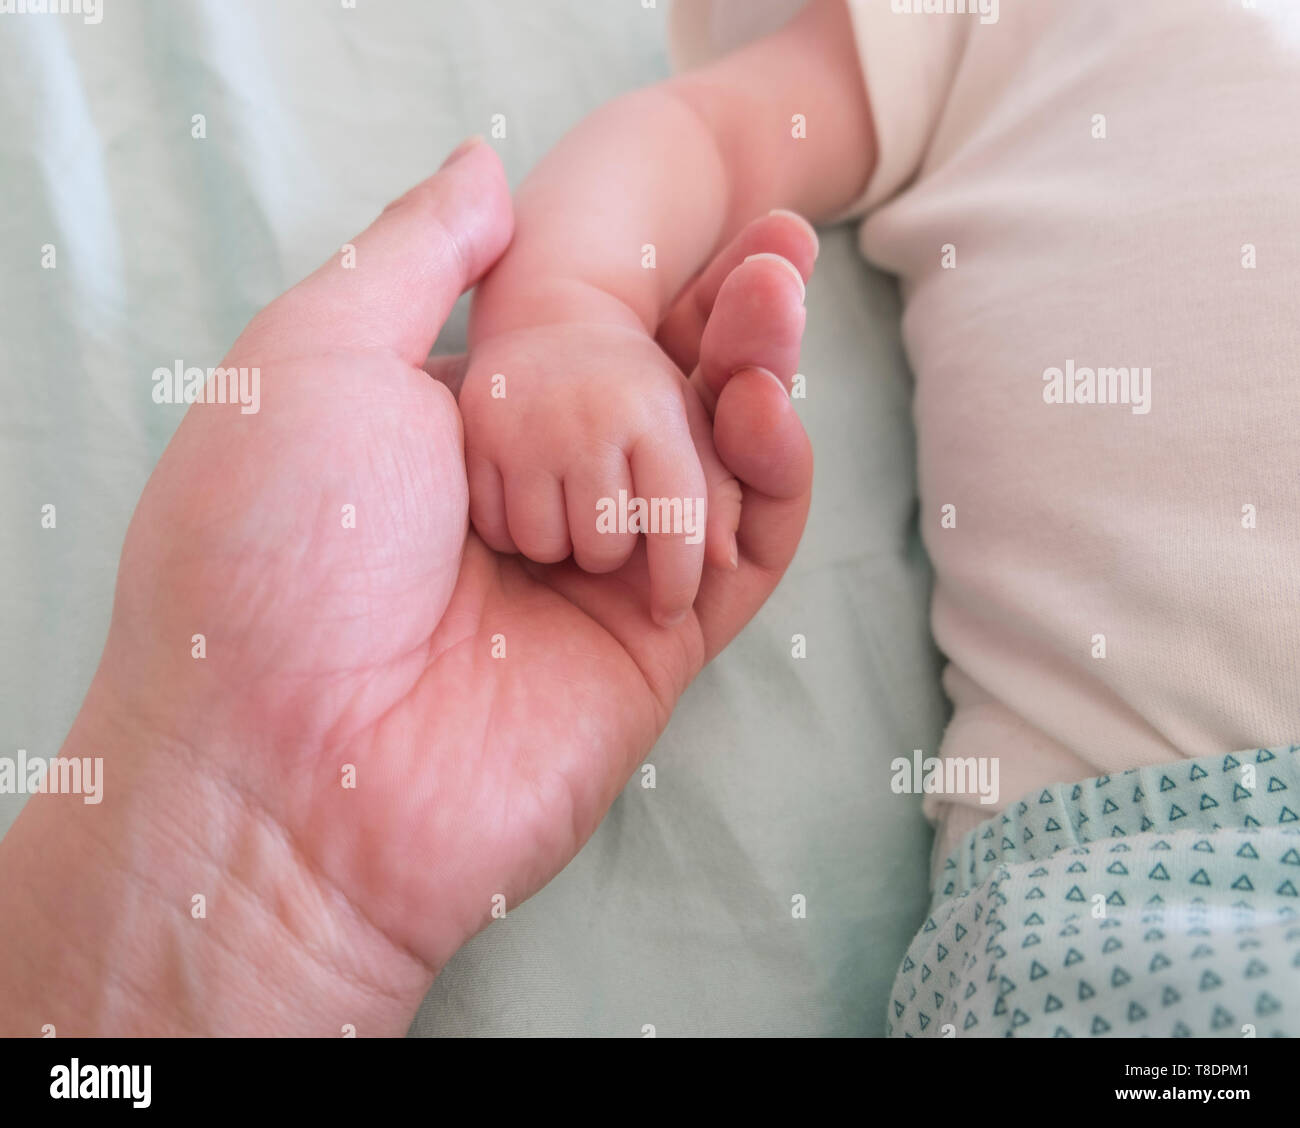 Adult Parent Holding And Cradling Baby's hand Stock Photo